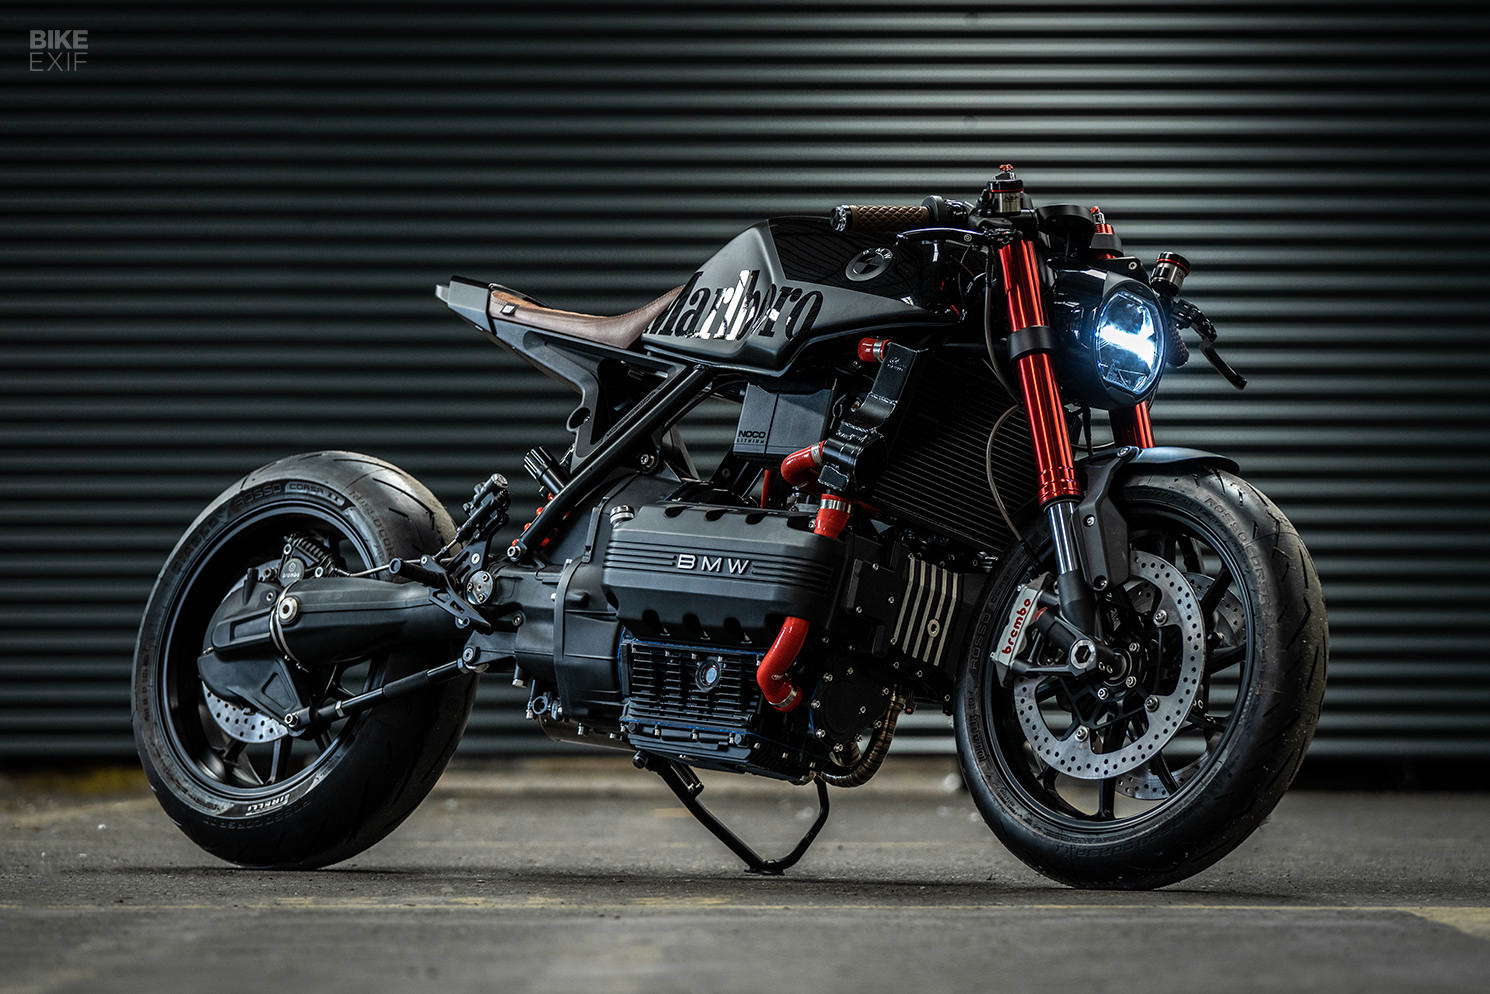 Two Smoking Hot Bmw K1100Rs Café Racers From Powerbrick | Bike Exif